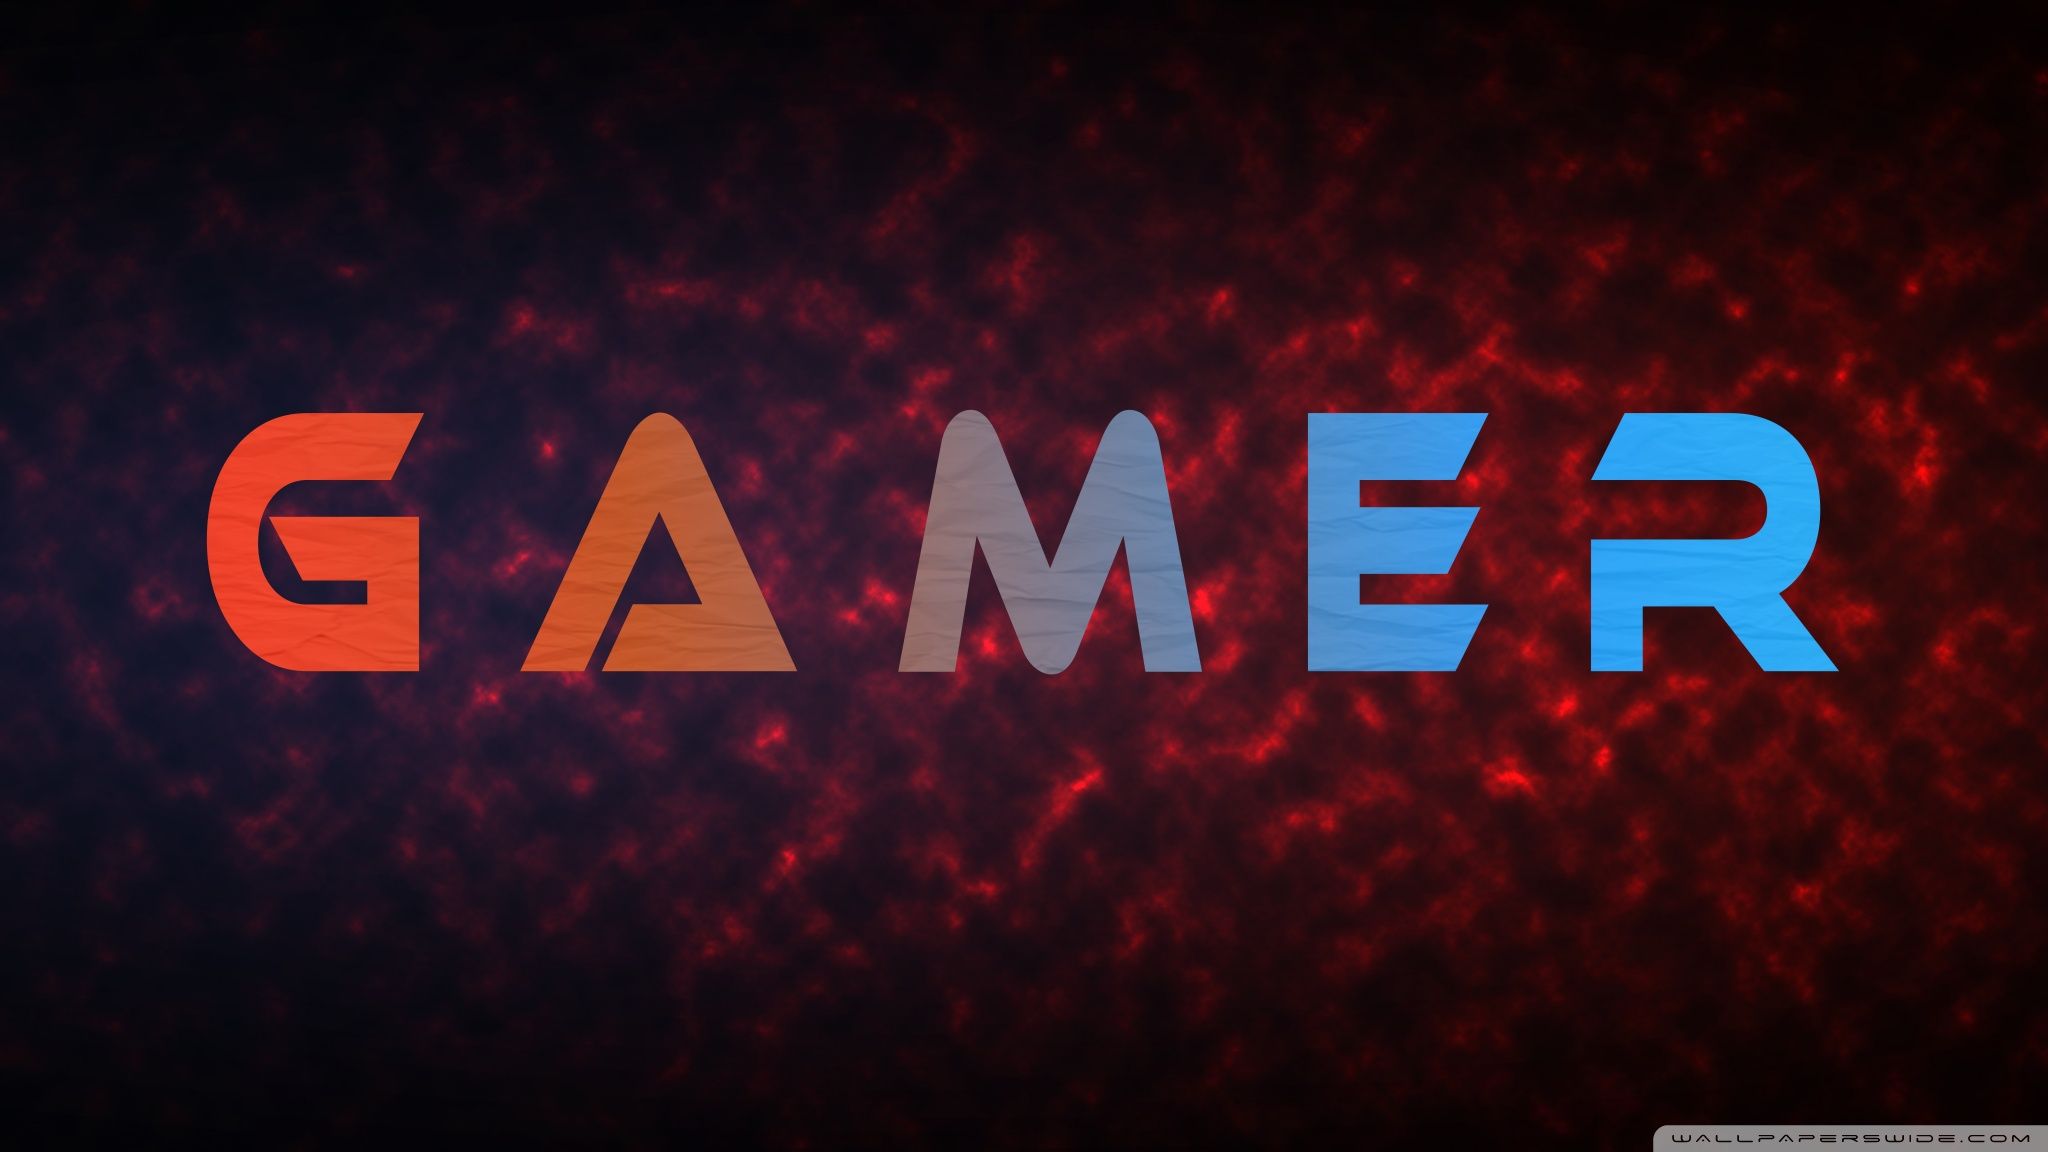 Typical Gamer Logo Wallpapers - Wallpaper Cave